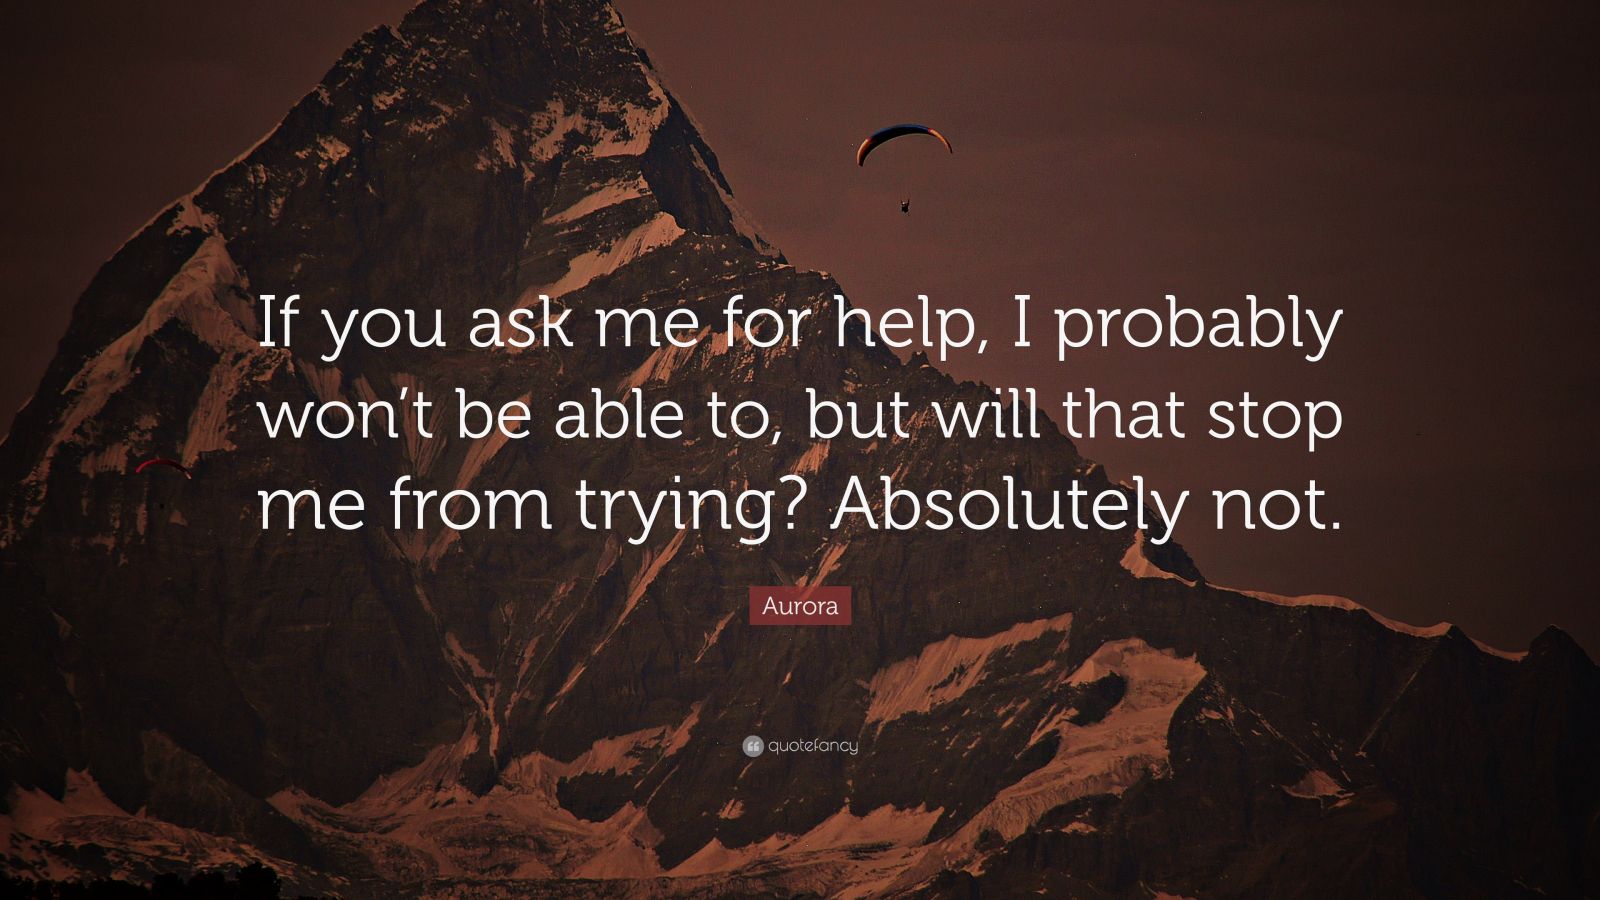 Aurora Quote: “If you ask me for help, I probably won’t be able to, but ...